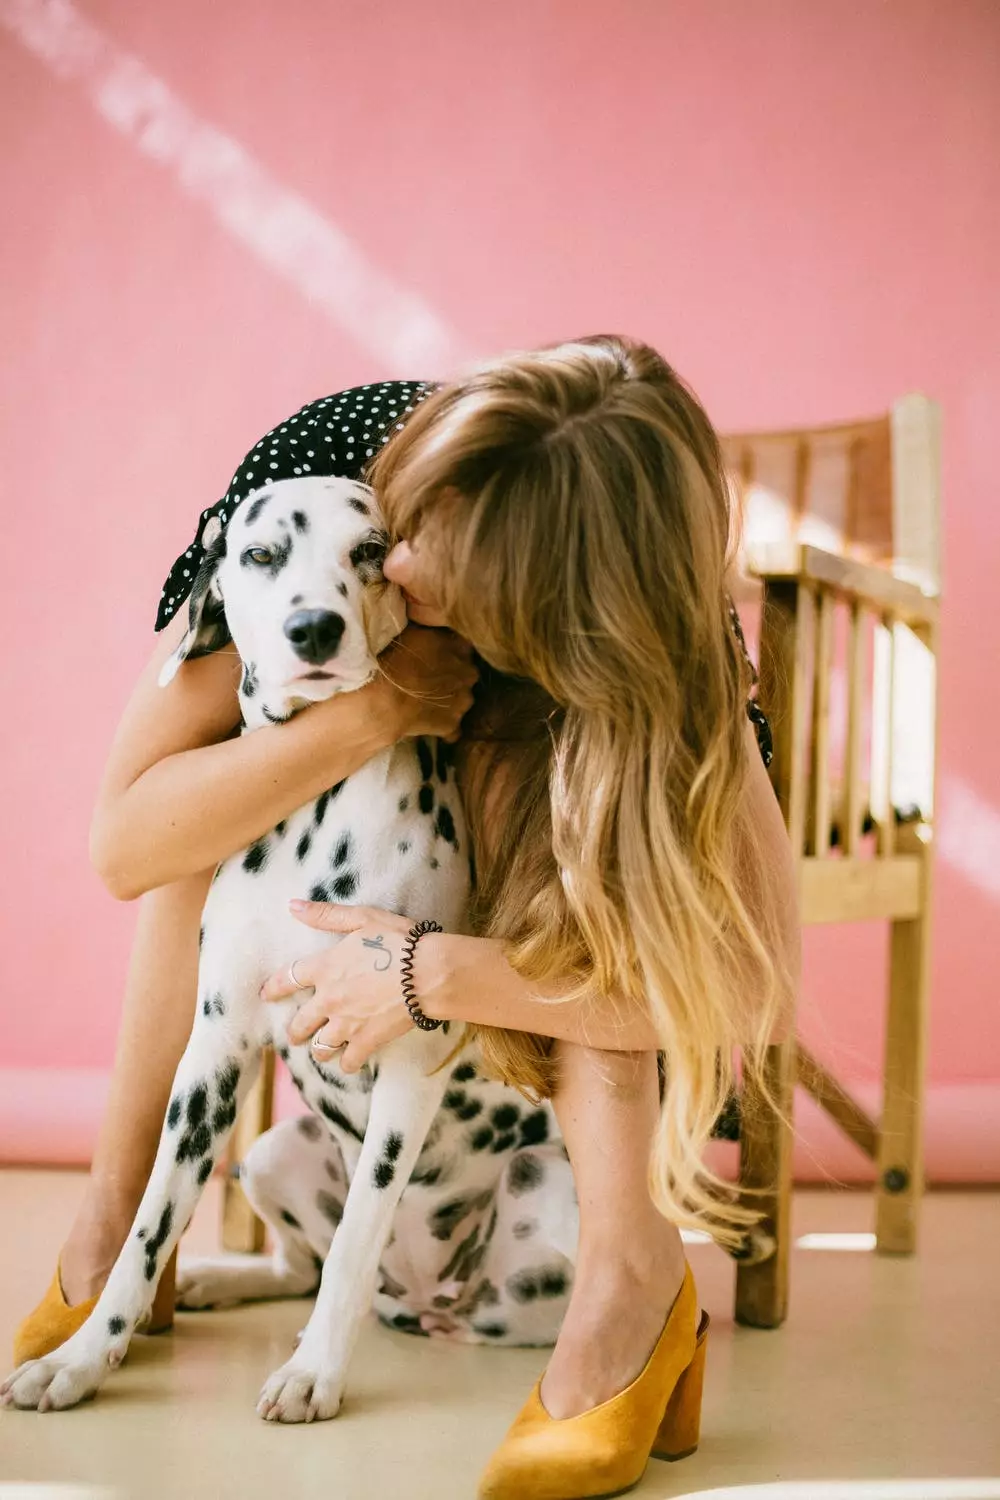 Pets bring a huge amount of joy to people's lives and improve mental and physical wellbeing (